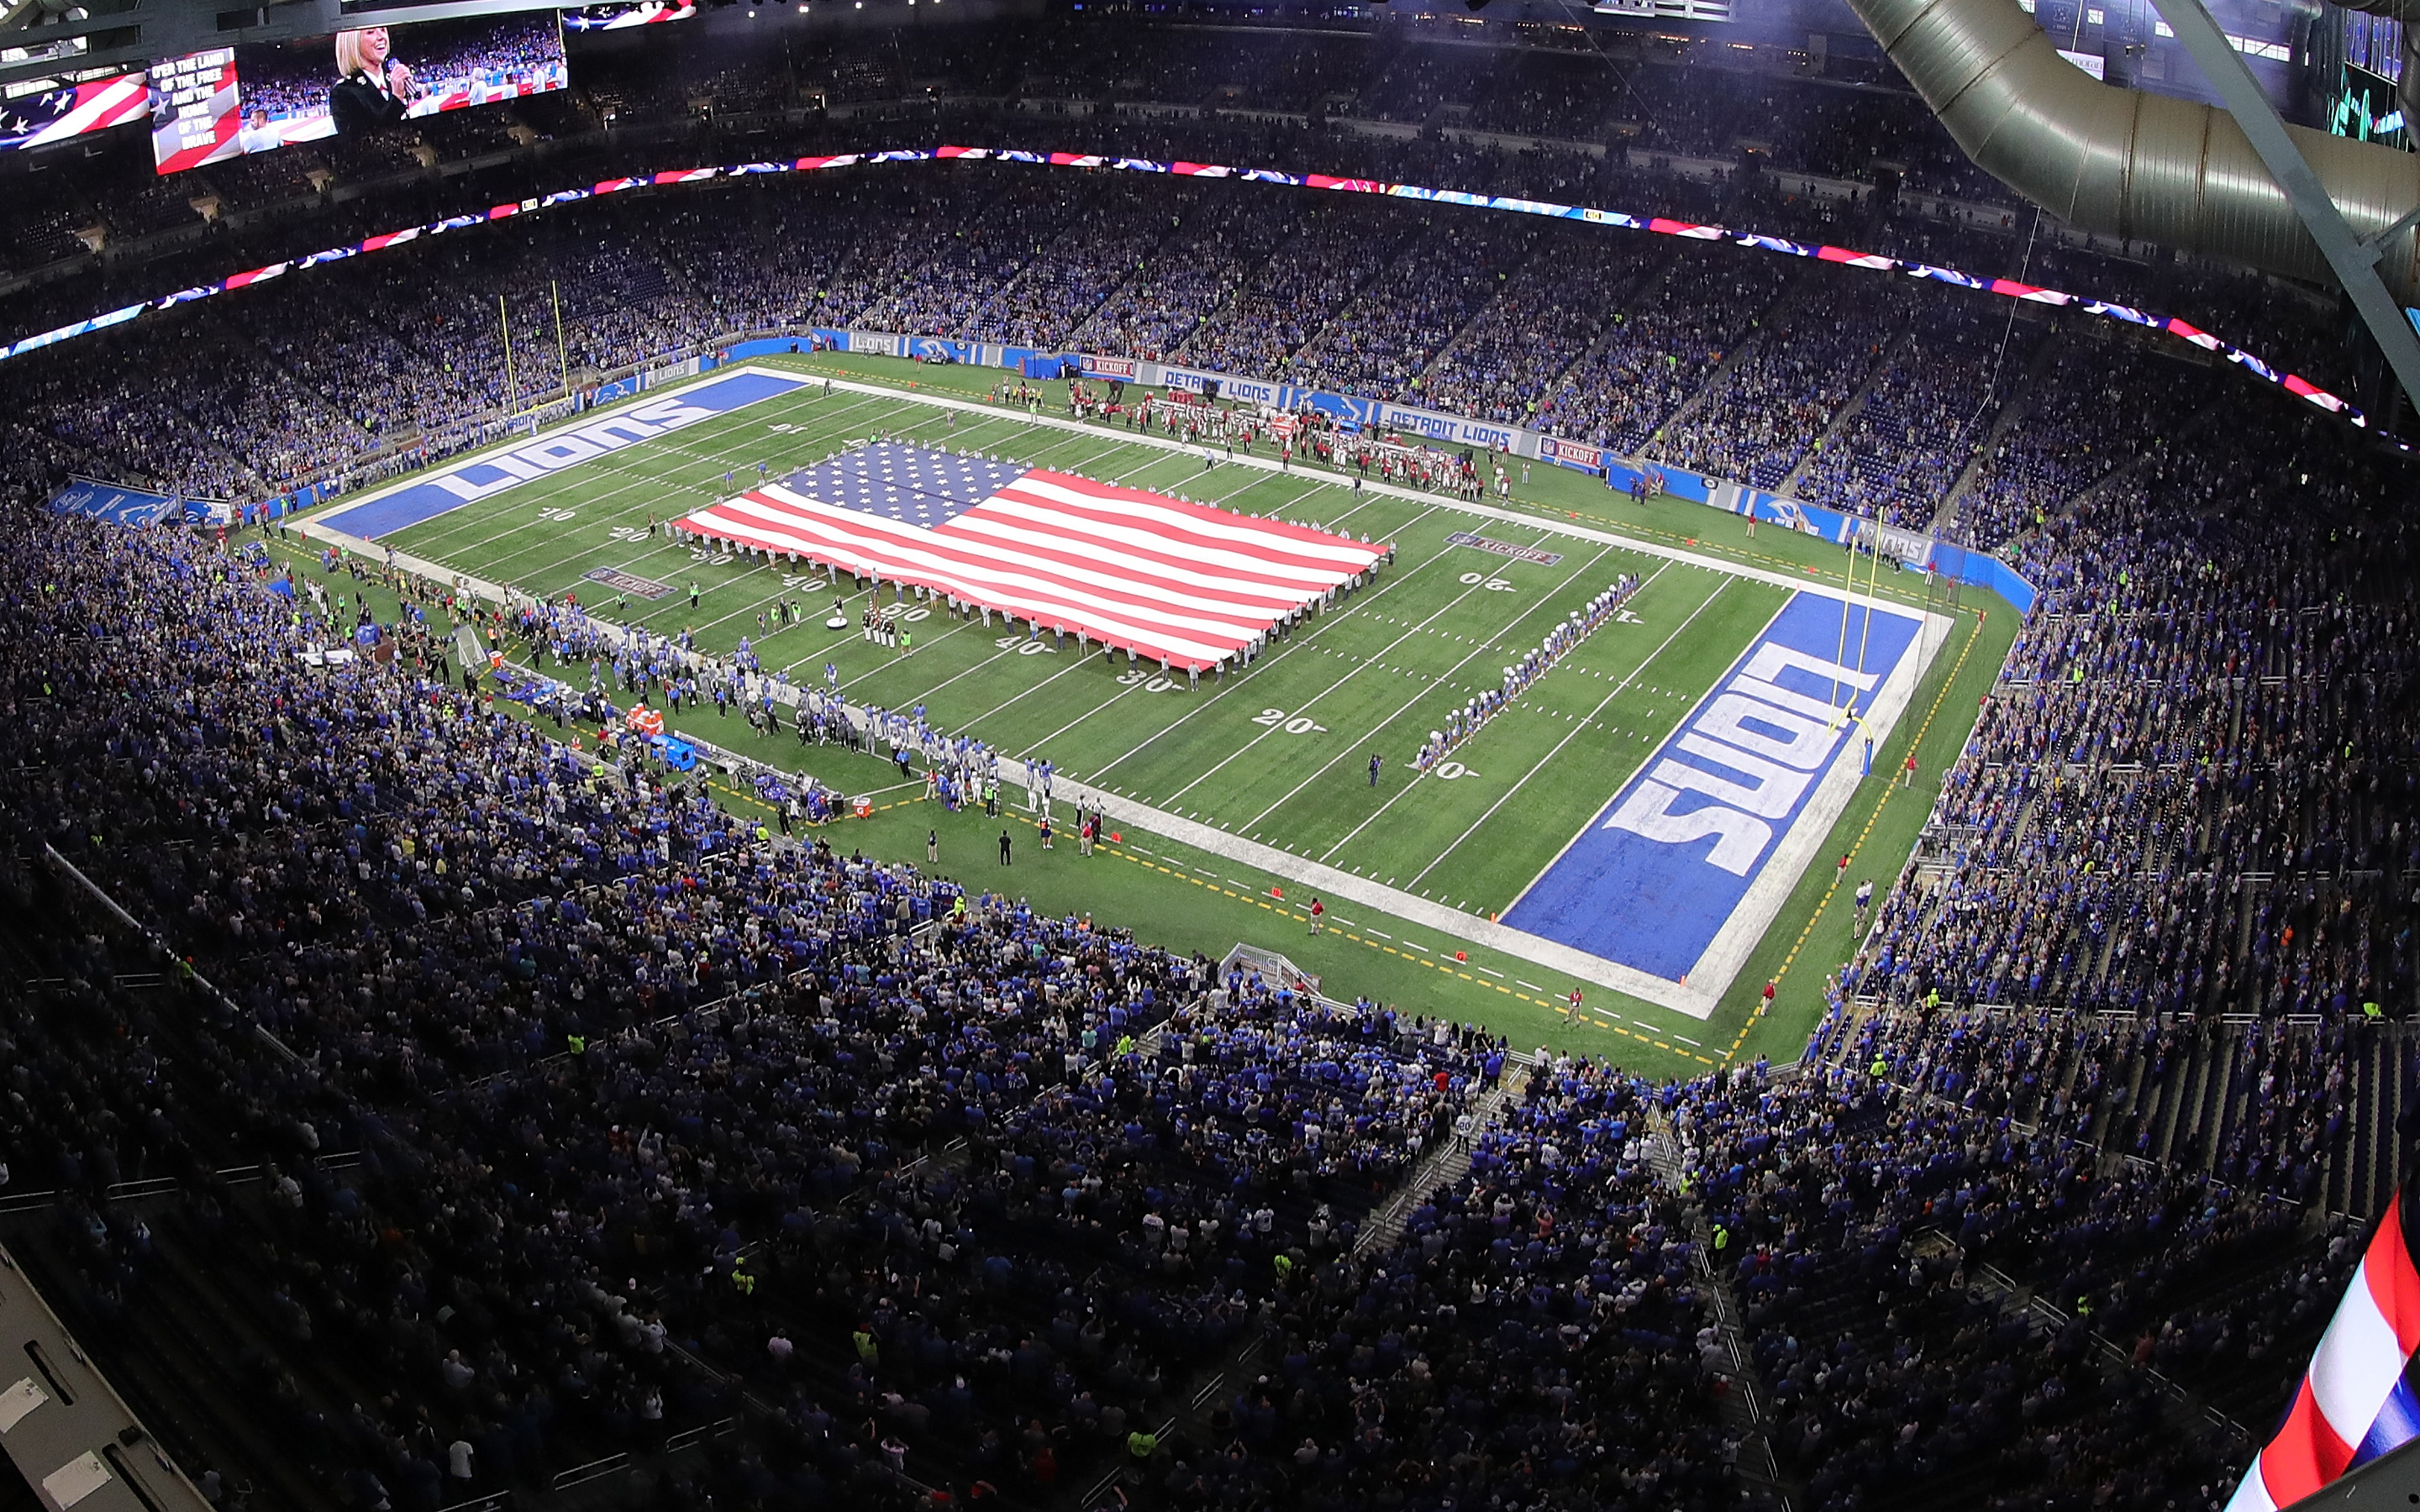 Download wallpaper Ford Field, Detroit Lions, NFL, National Football League, american football, stadium, Detroit, Michigan, USA for desktop with resolution 2880x1800. High Quality HD picture wallpaper